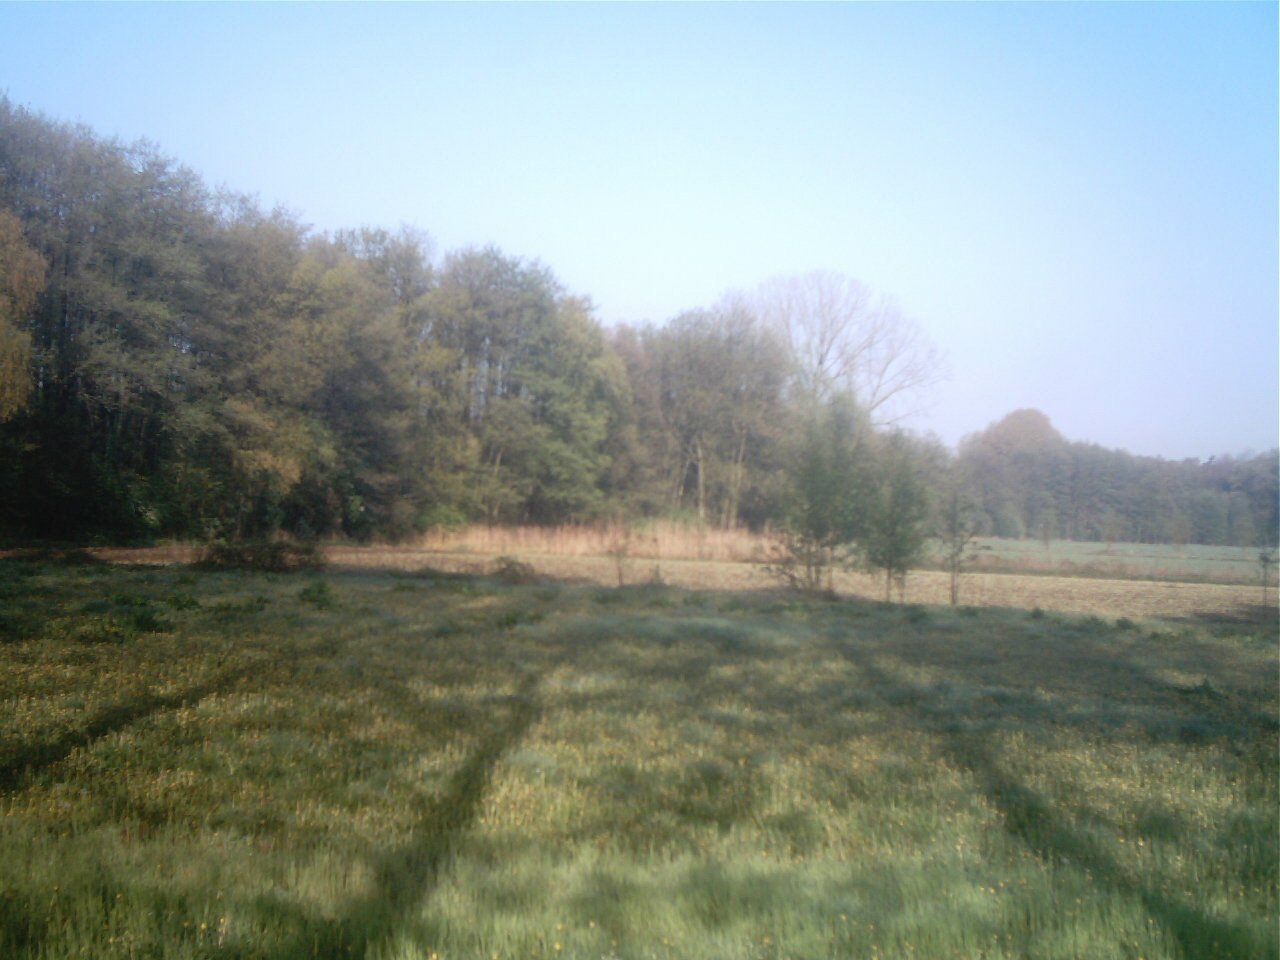 the field is full of tall grass and many trees